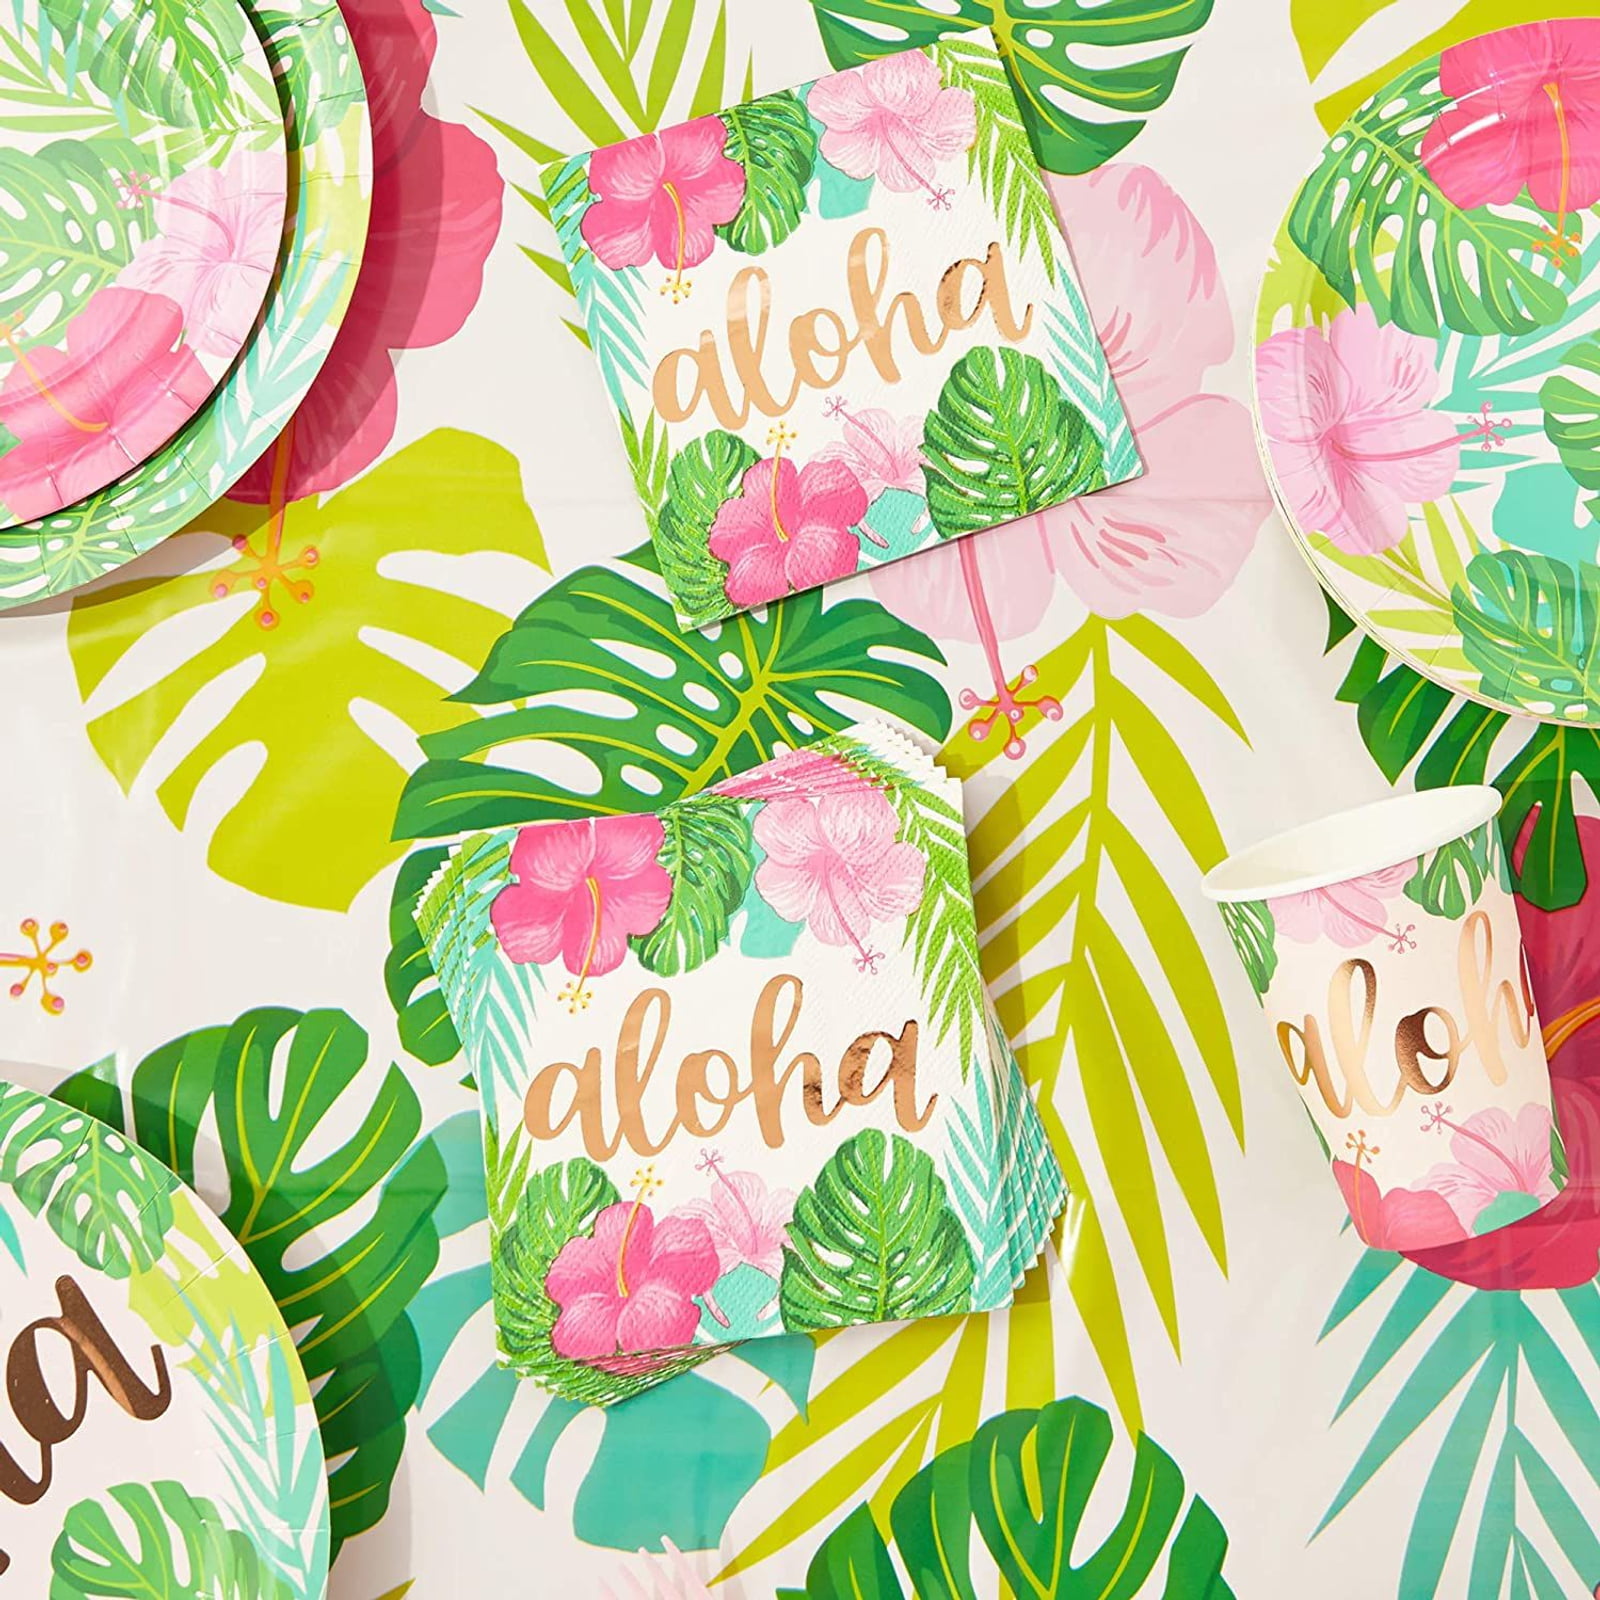 Creative Converting Aloha 16 Ct Lunch Napkins Summer Luau Party Pineapple Hibiscus